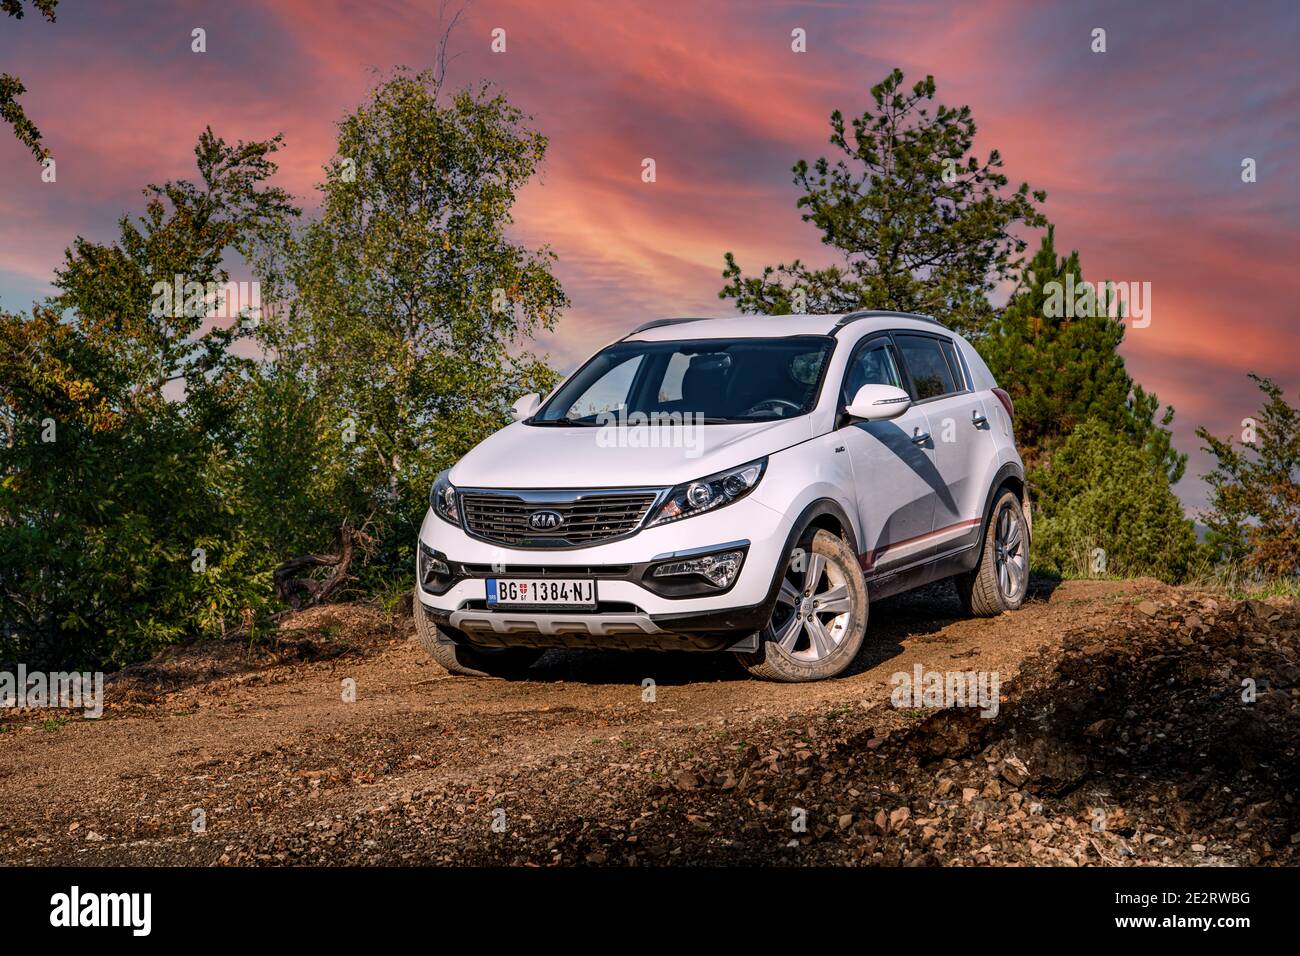 Kia Sportage 2.0 CRDI awd or 4x4, white color, parked on a gravel road, with beautiful orange sunset in the background.  Best car for off road. Tara Stock Photo